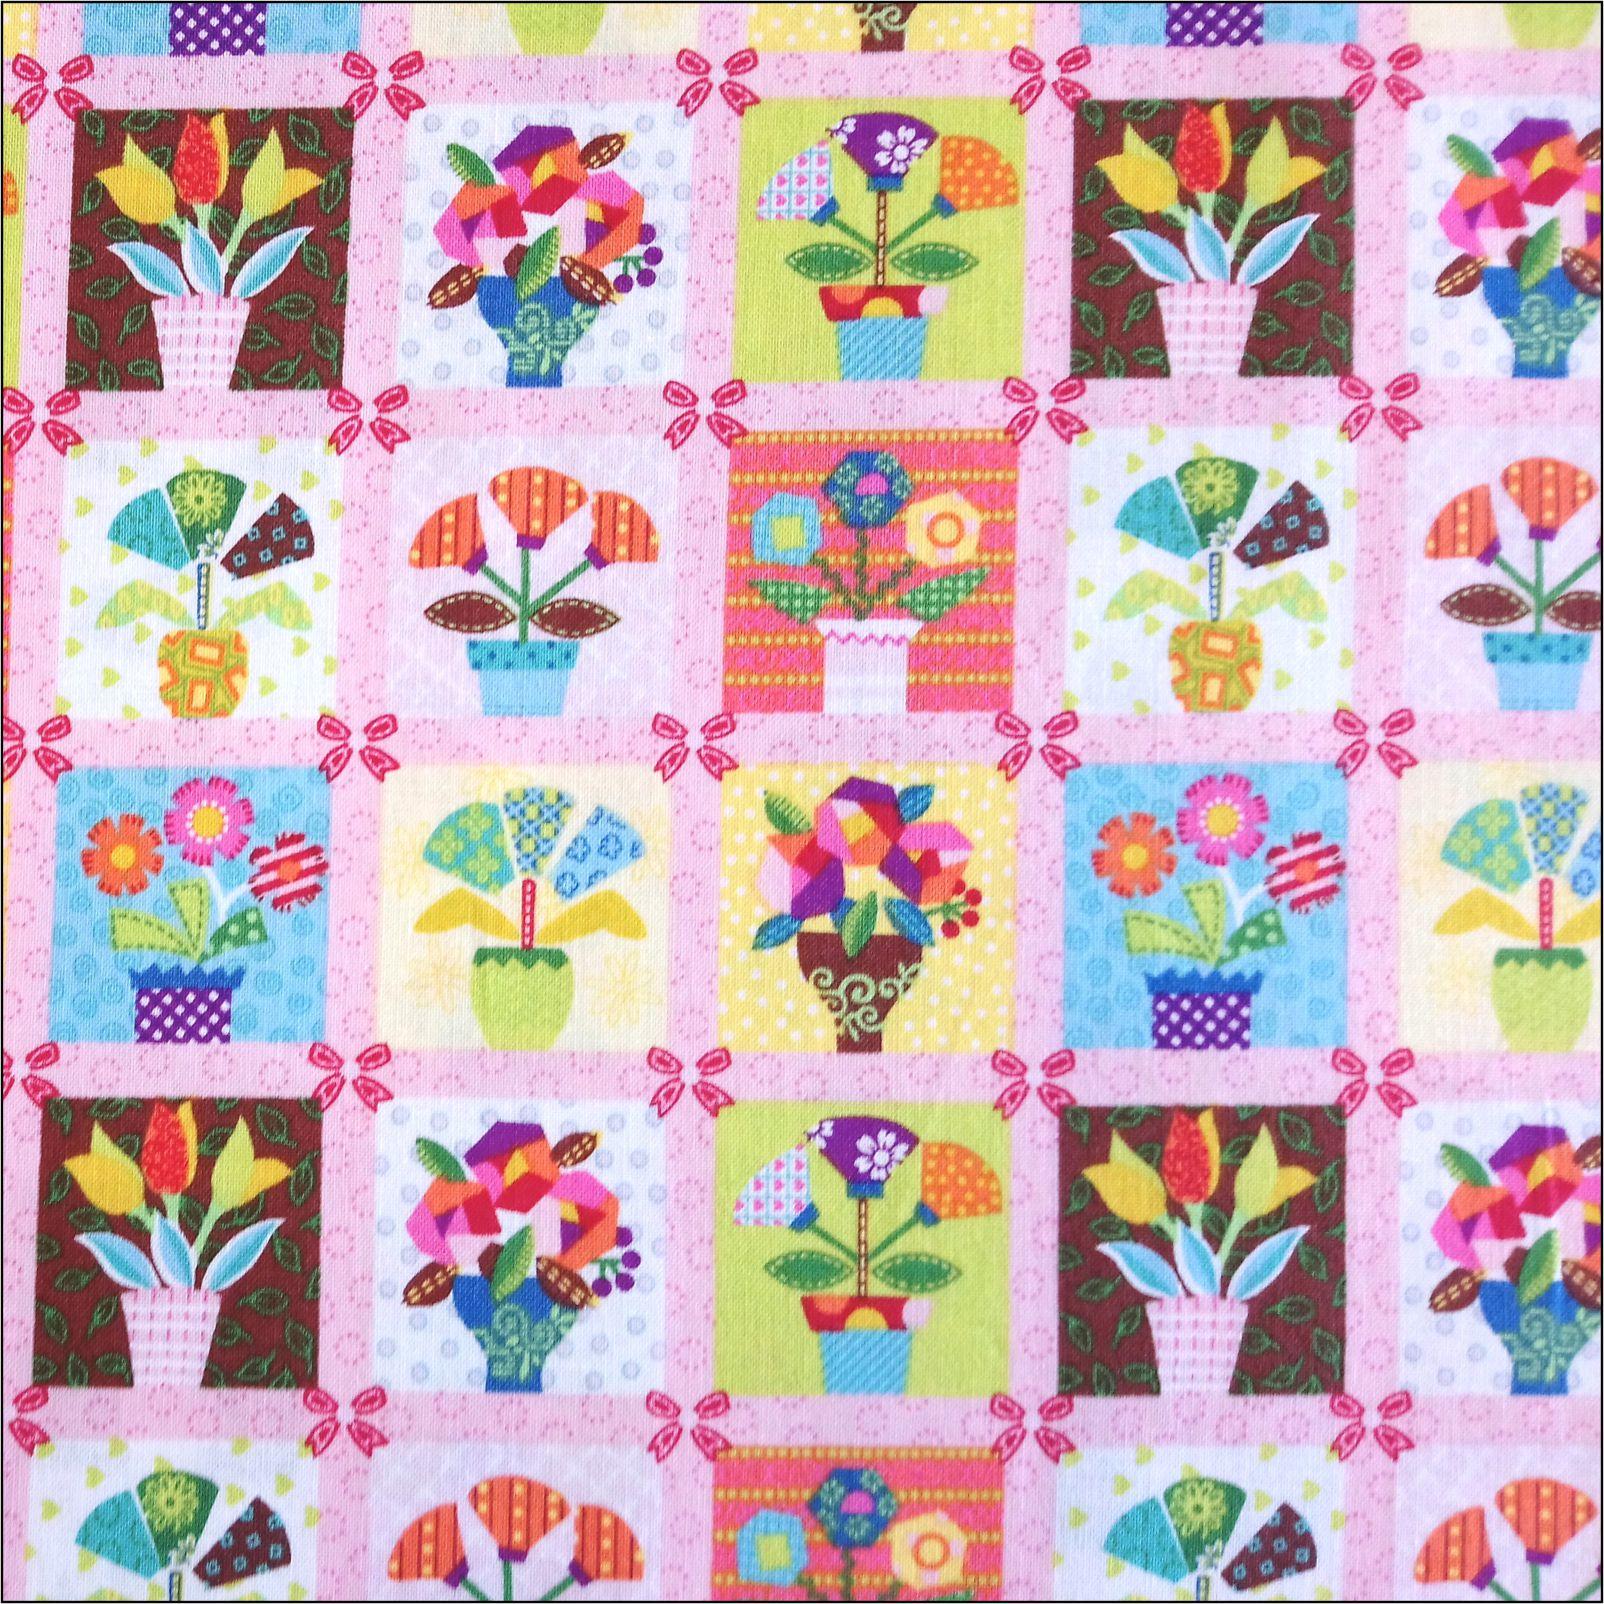 Flower Pots Patchwork Square Cotton Fabric | More Sewing